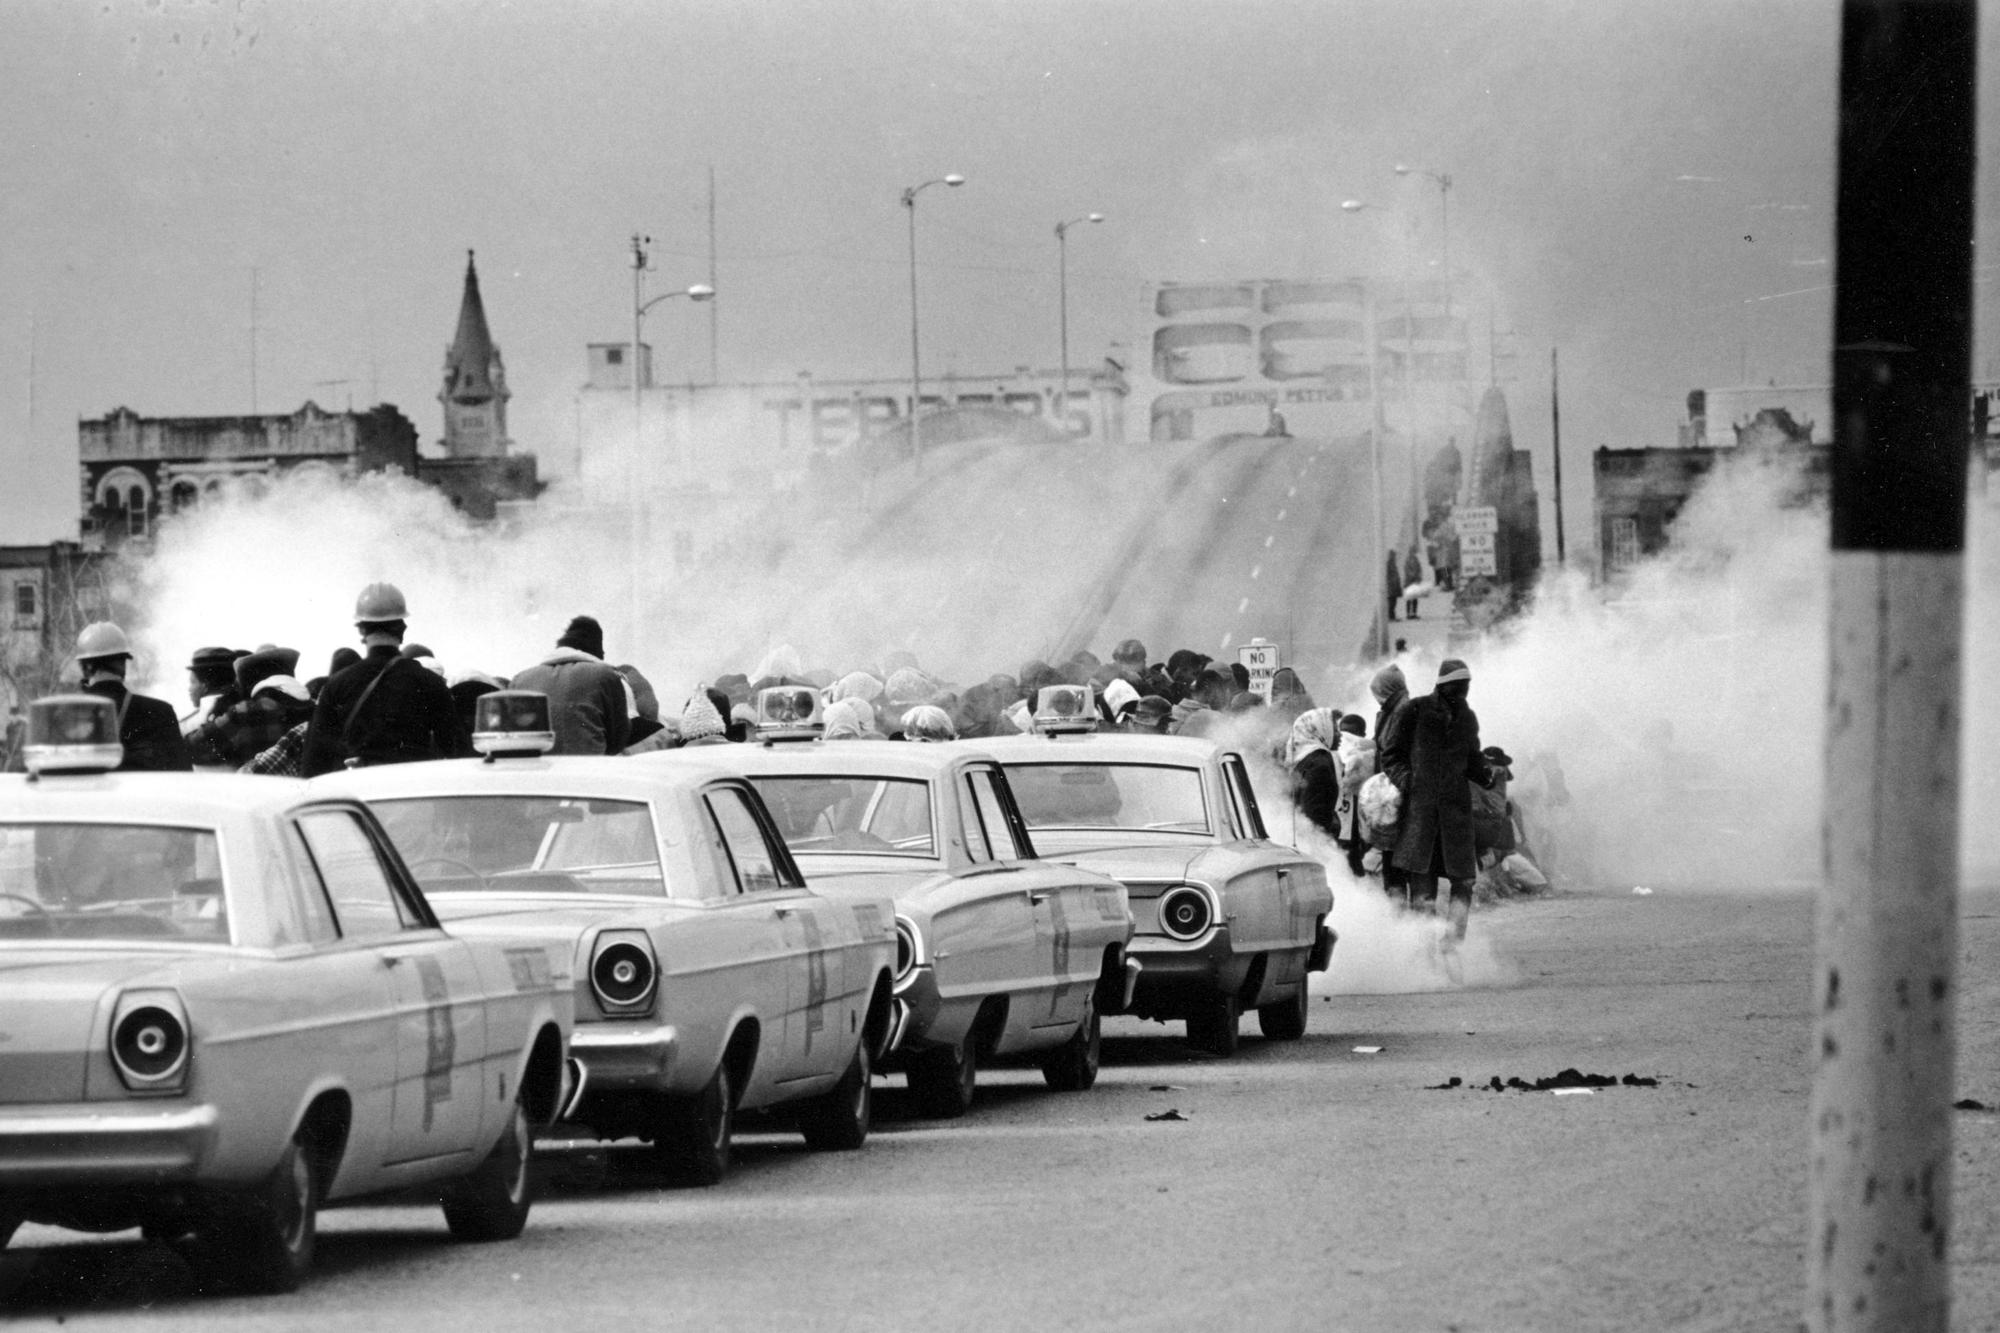 FILE - Tear gas fumes fill the air as state troopers, ordered by Gov. George Wallace, break up a demonstration march in Selma, Ala., on what is known as Bloody Sunday on March 7, 1965. Andrew Young, one of the last surviving members of Martin Luther King Jr.'s inner circle, recalled the journey to the signing of the Voting Rights Act as an arduous one, often marked by violence and bloodshed. (AP Photo)